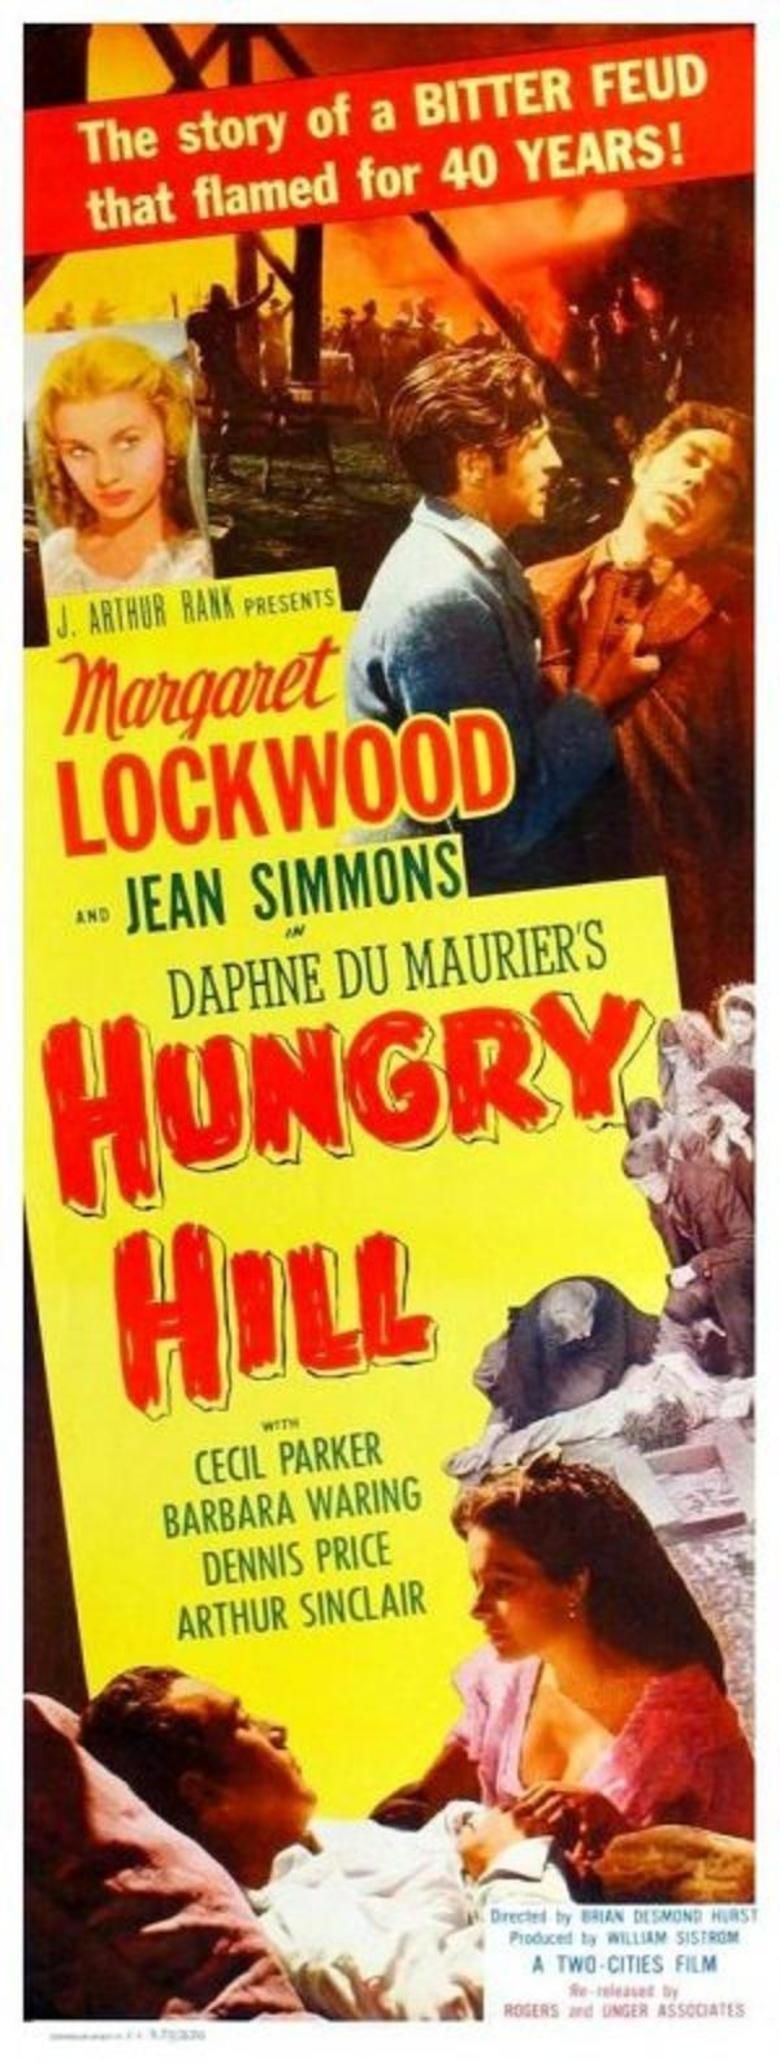 Hungry Hill (film) movie poster